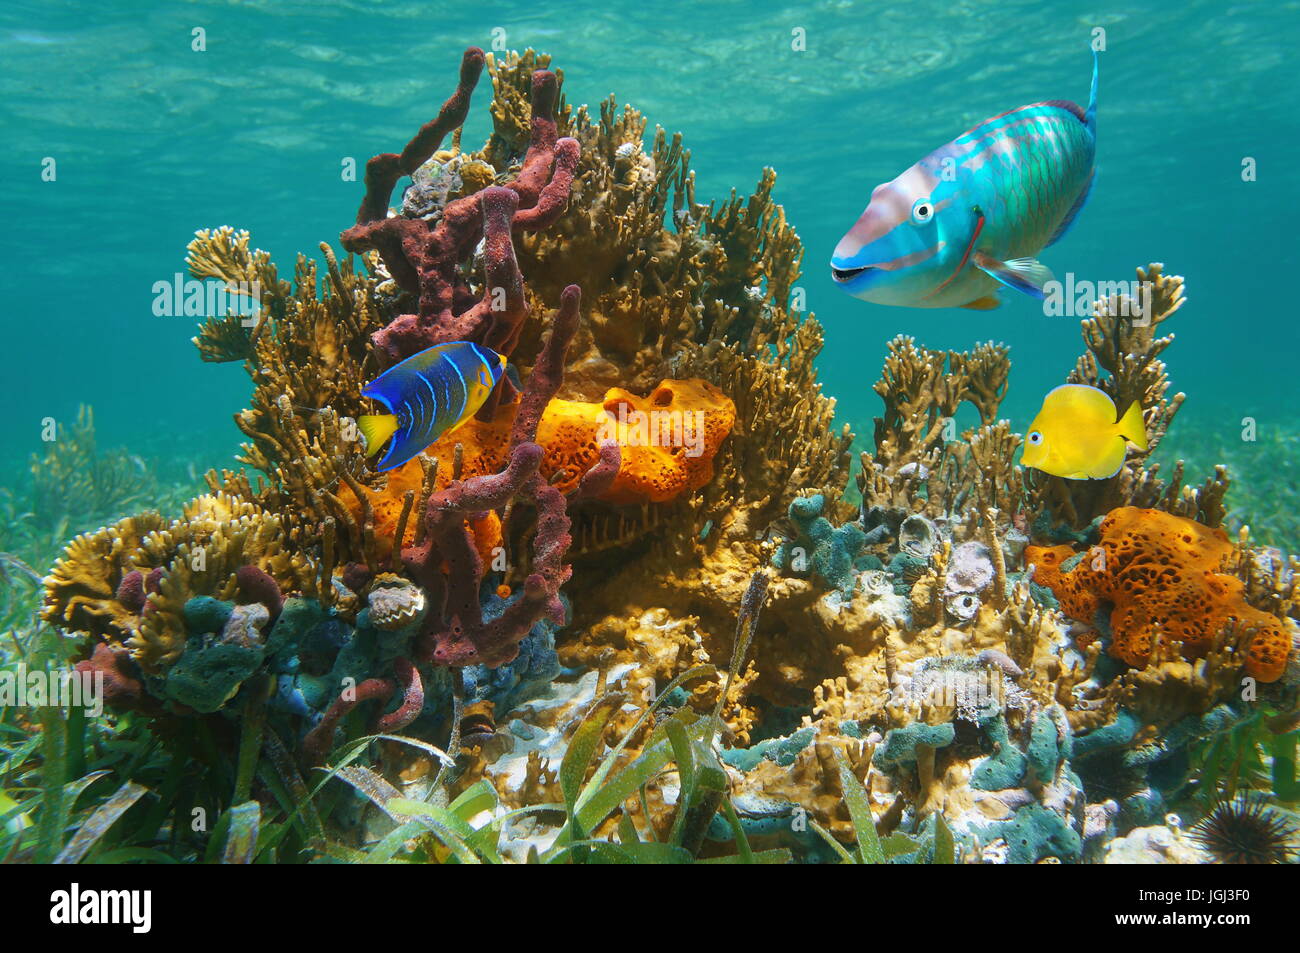 Colorful tropical marine life underwater with fish, coral and sponges, Atlantic ocean, Bahamas Stock Photo